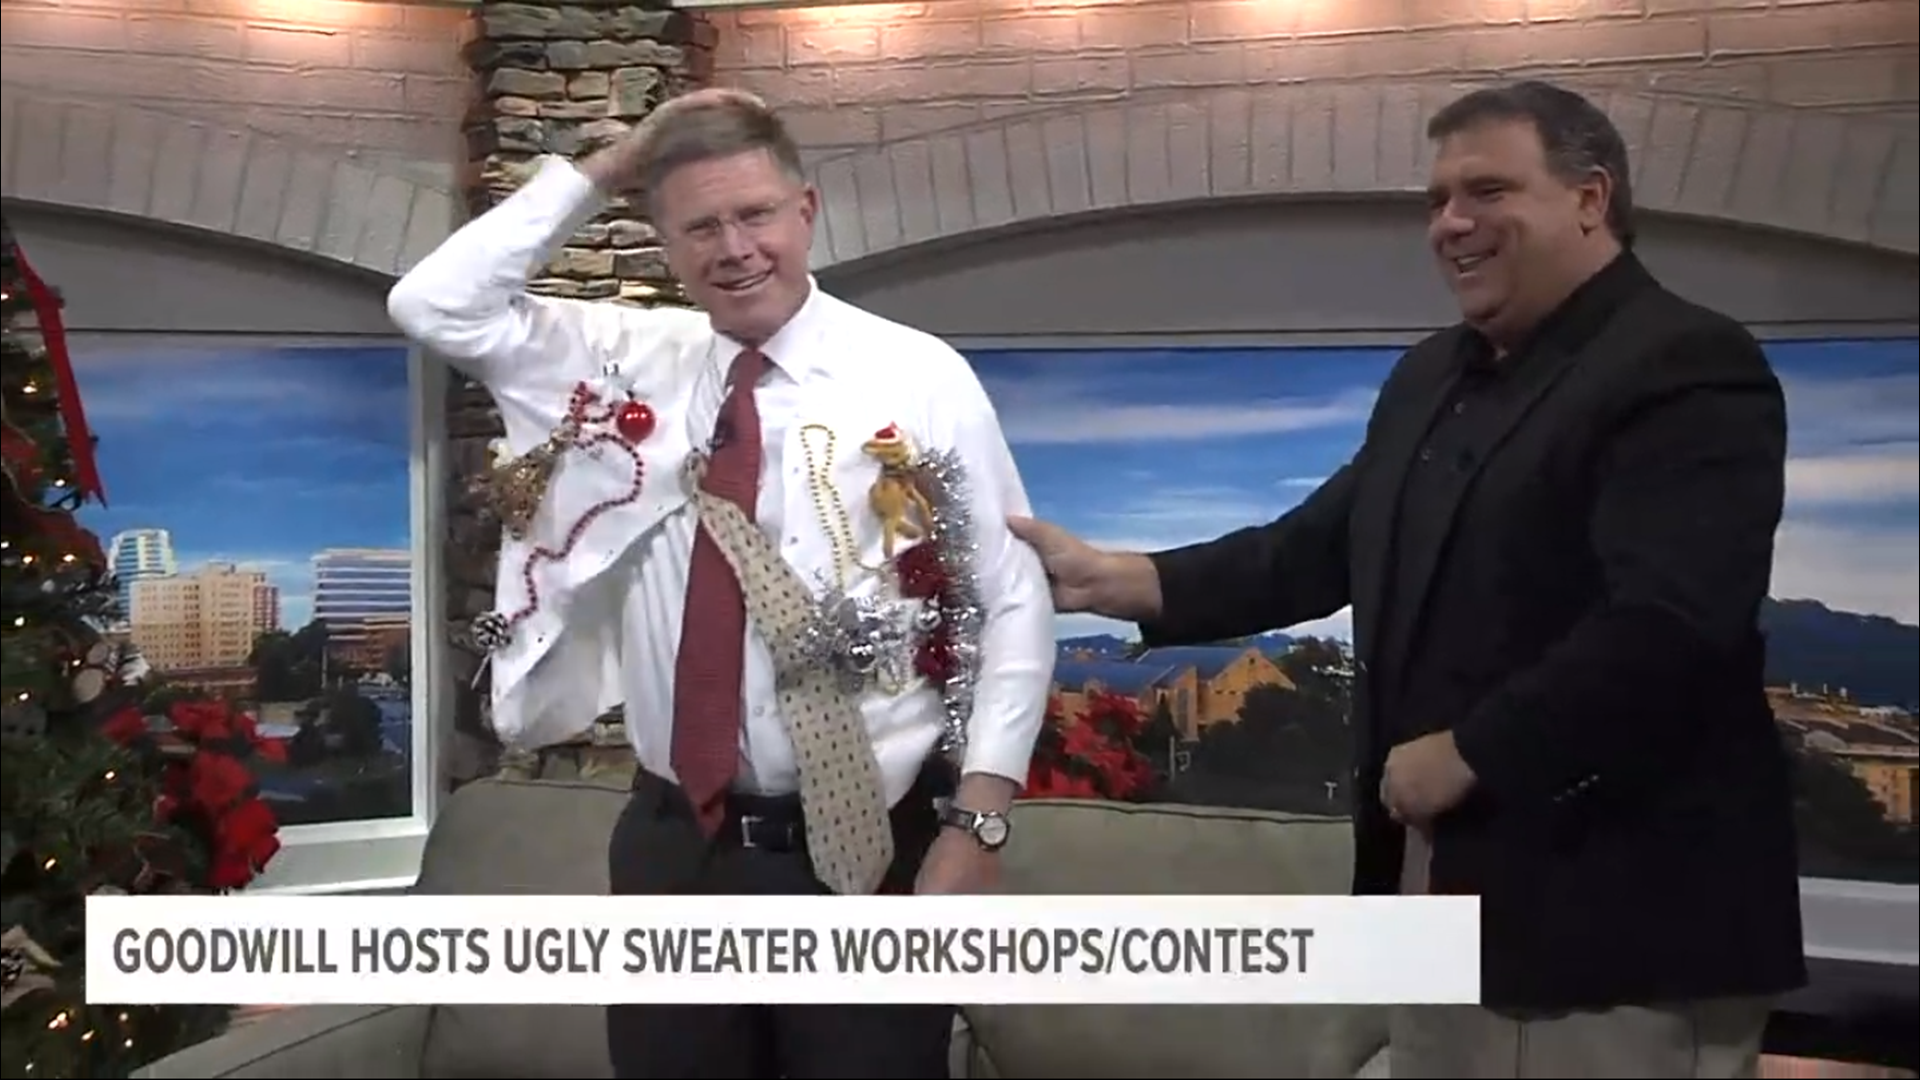 Russell gives Todd a Christmas sweater he designed specifically for him. Visit for more on the Goodwill Ugly Sweater workshop & contest. Dec. 2, 2019-4pm.